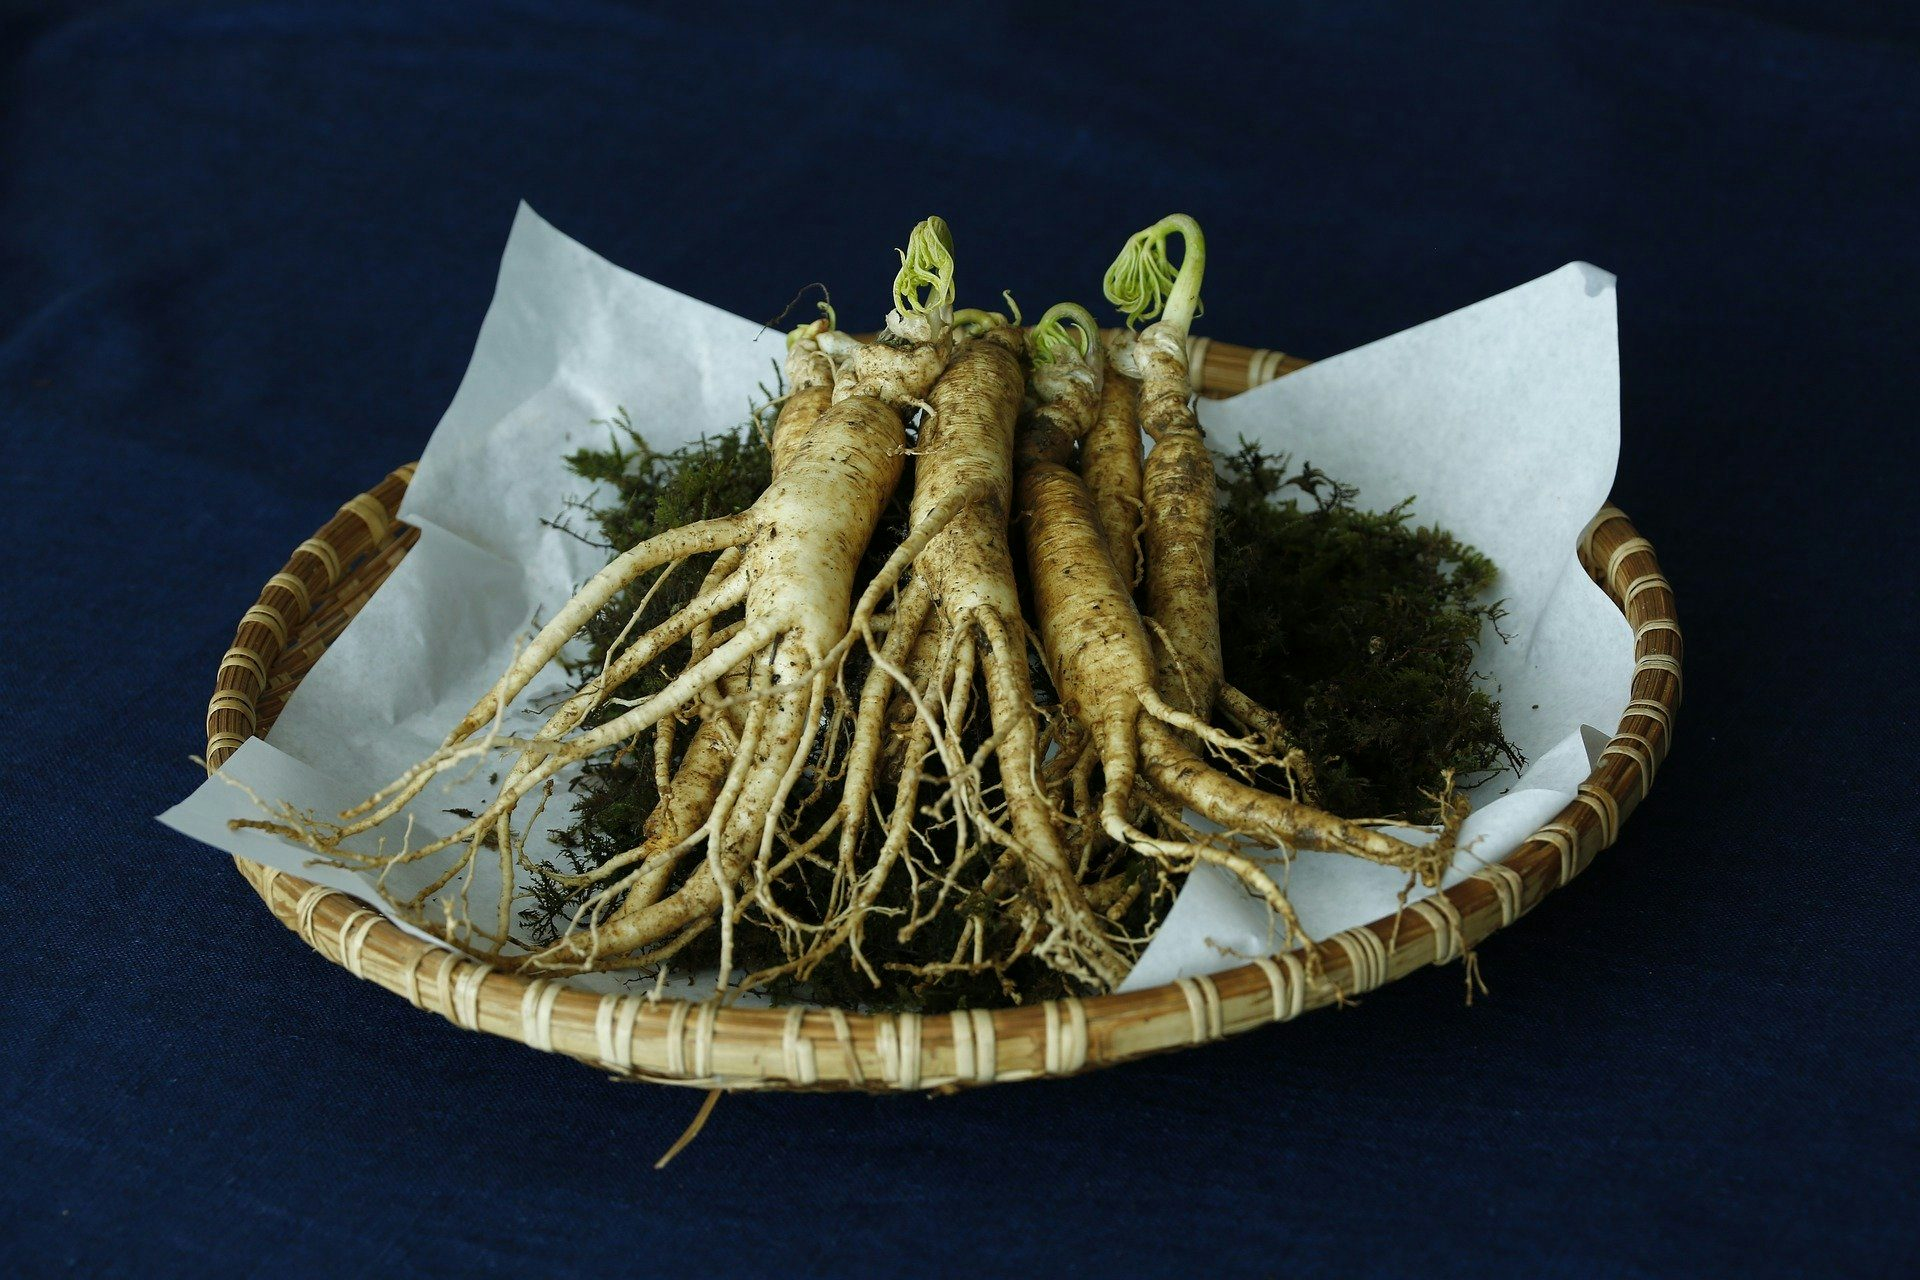 Ginseng extract separation